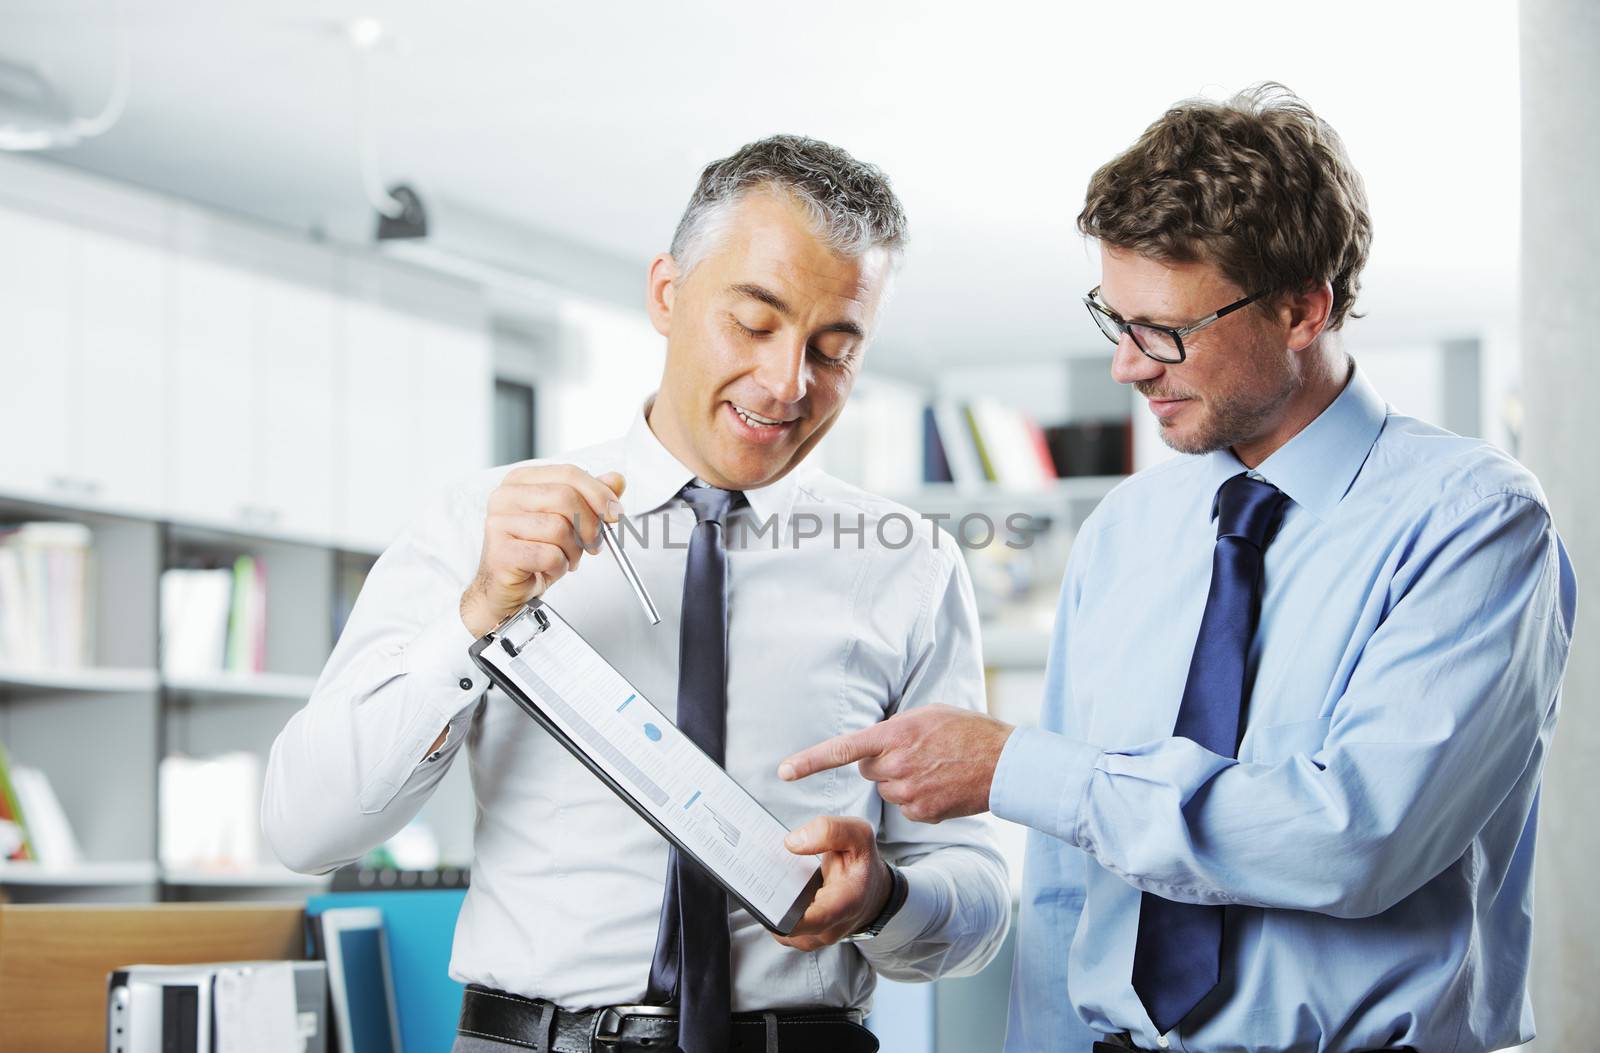 Business colleagues discussing together in an office